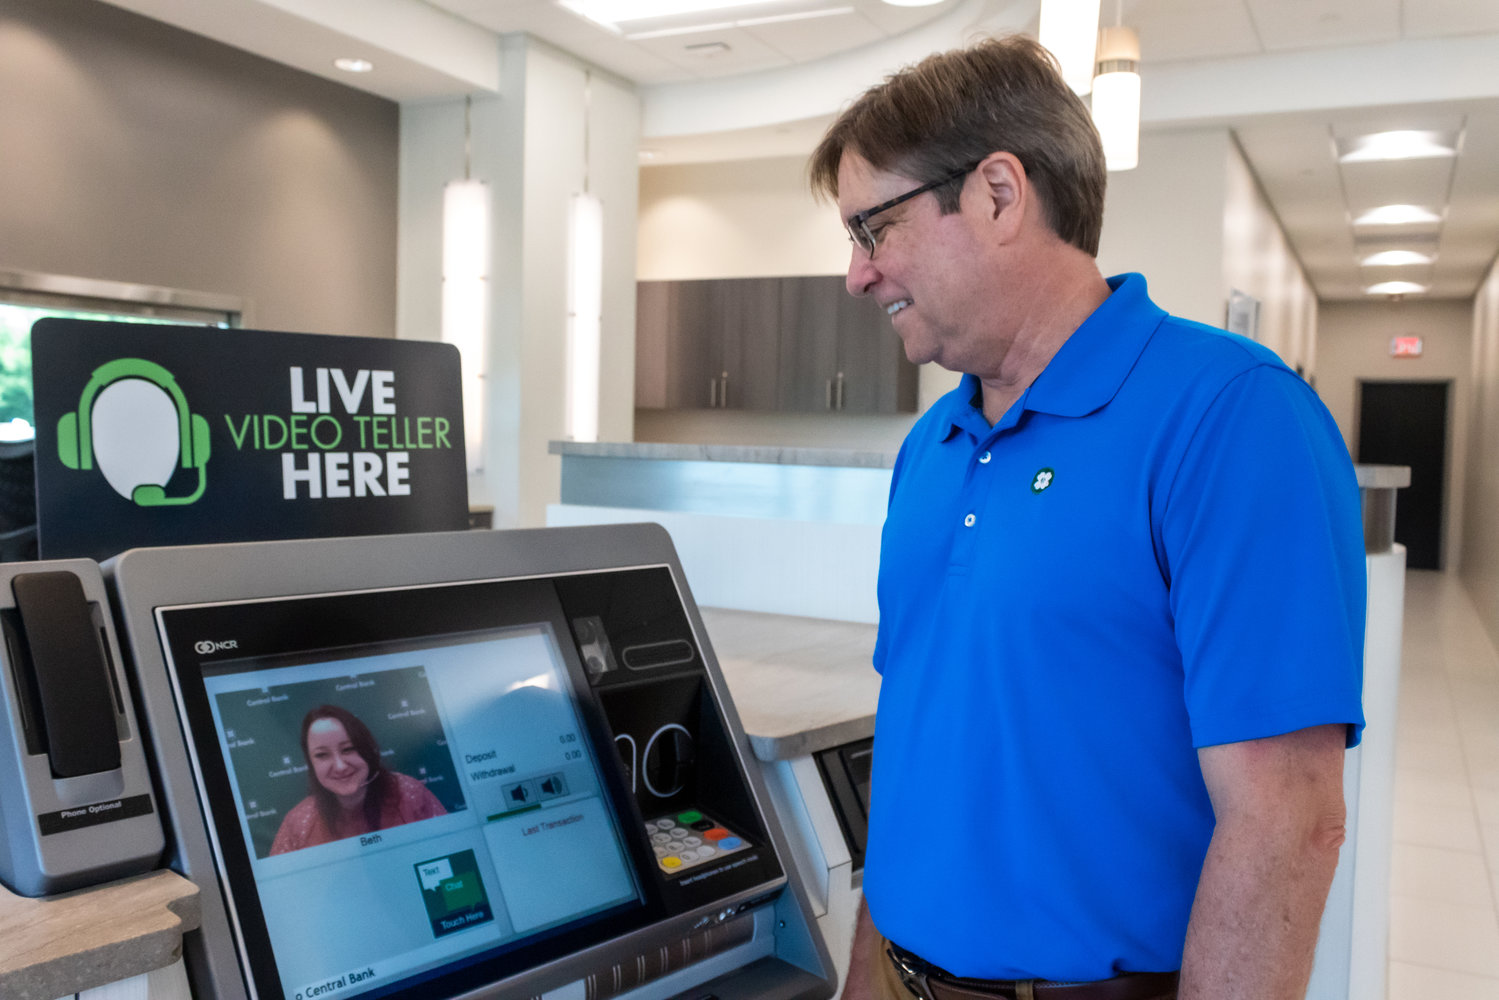 Andrew Tasset of Central Bank in Springfield converses with Columbia-based teller Beth Burkett via one of nine video teller machines in the area.